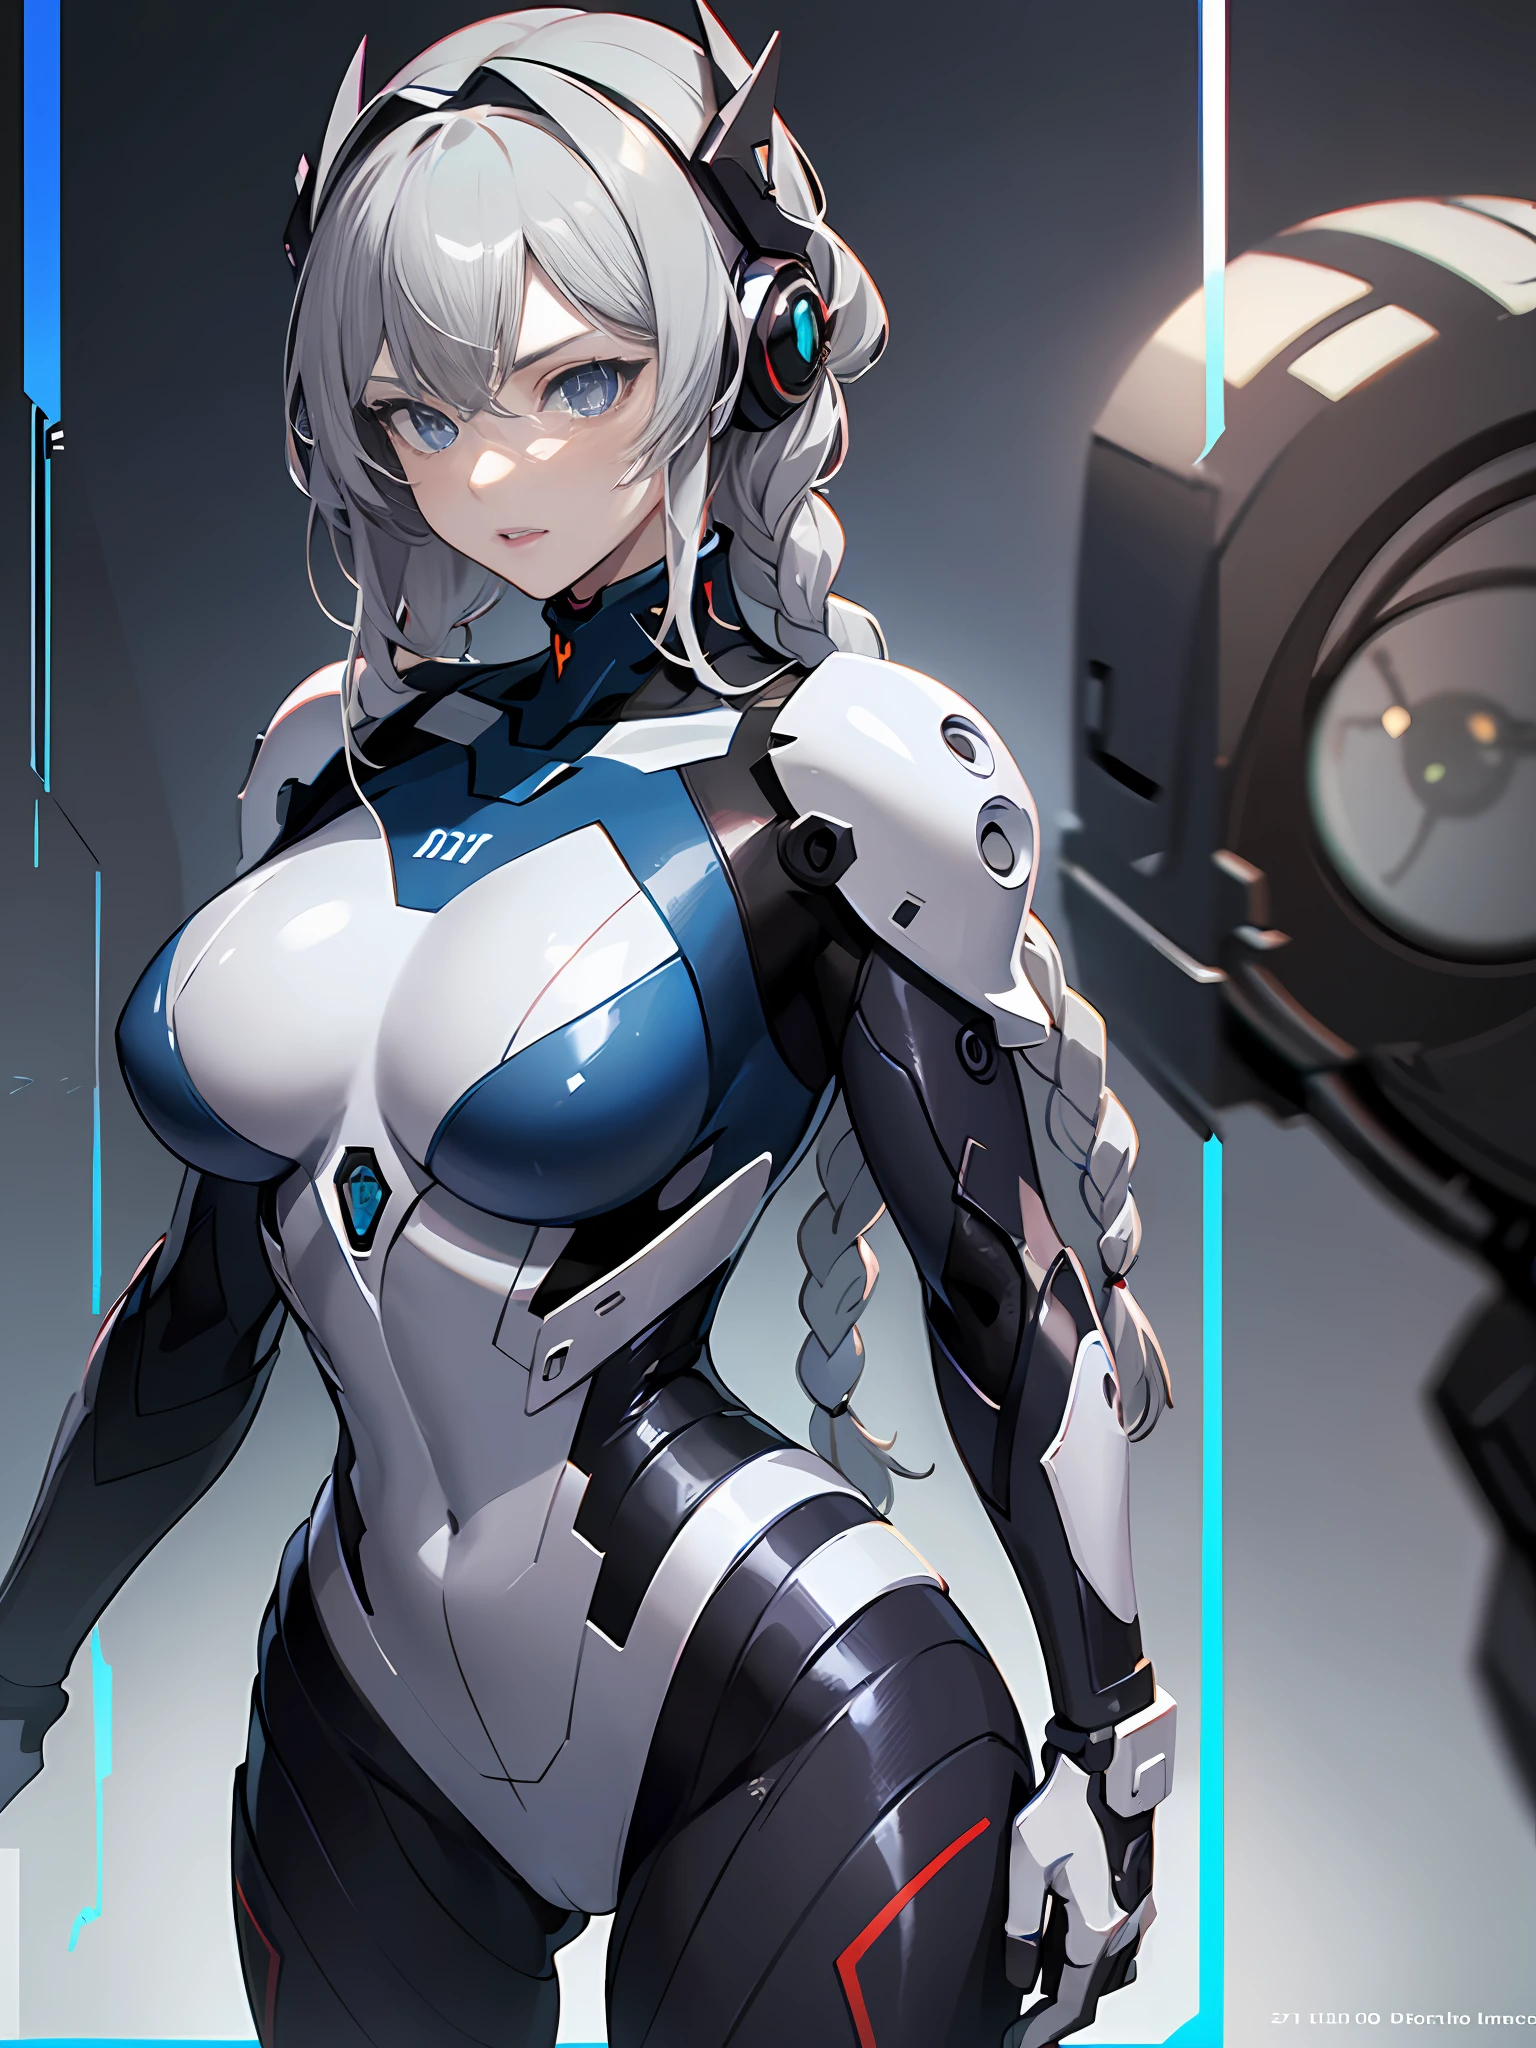 ((Best Quality)), ((masutepiece)), (Detailed: 1.4), (Absurd), Female fighter pilots ready for war, Dark skin, flash dc comics, lightning and lightning, muscular sculptural body defined, Full body, half-thick naked thighs, Closed mouth, muscular body covered in technological clothing, Neon Genesis Evangelion style, Cyberpunk, generous neckline, ((perfect medium breasts)), (Super light blue eyes without pupils),  ((White and dark red clothes)), (((gray hair in braids))), long eyelashes heavy makeup, by mucha, niji --V5, close to real, psychopath, Crazy face, Sexy Pose, Genesis Evangelion neon style robot giant head background, 2 pieces clothing, Airplane winged shoulder pads, pastel, Centered, scale to fit the dimensions, nffsw (High dynamic range), Ray tracing,NVIDIA RTX,Hyper-Resolution,Unreal 5,Subsurface Dispersion, PBR Texture, Post-processing, Anisotropy Filtering, depth of fields, Maximum clarity and sharpness, Multilayer textures, Albedo and specular maps, Surface Shading, accurate simulation of light and material interactions, Perfect proportions, Octane Render, Two-tone lighting, Wide aperture, Low ISO, White Balance, thirds rule, in 8K, Crysisnanosuit,Blue eyes